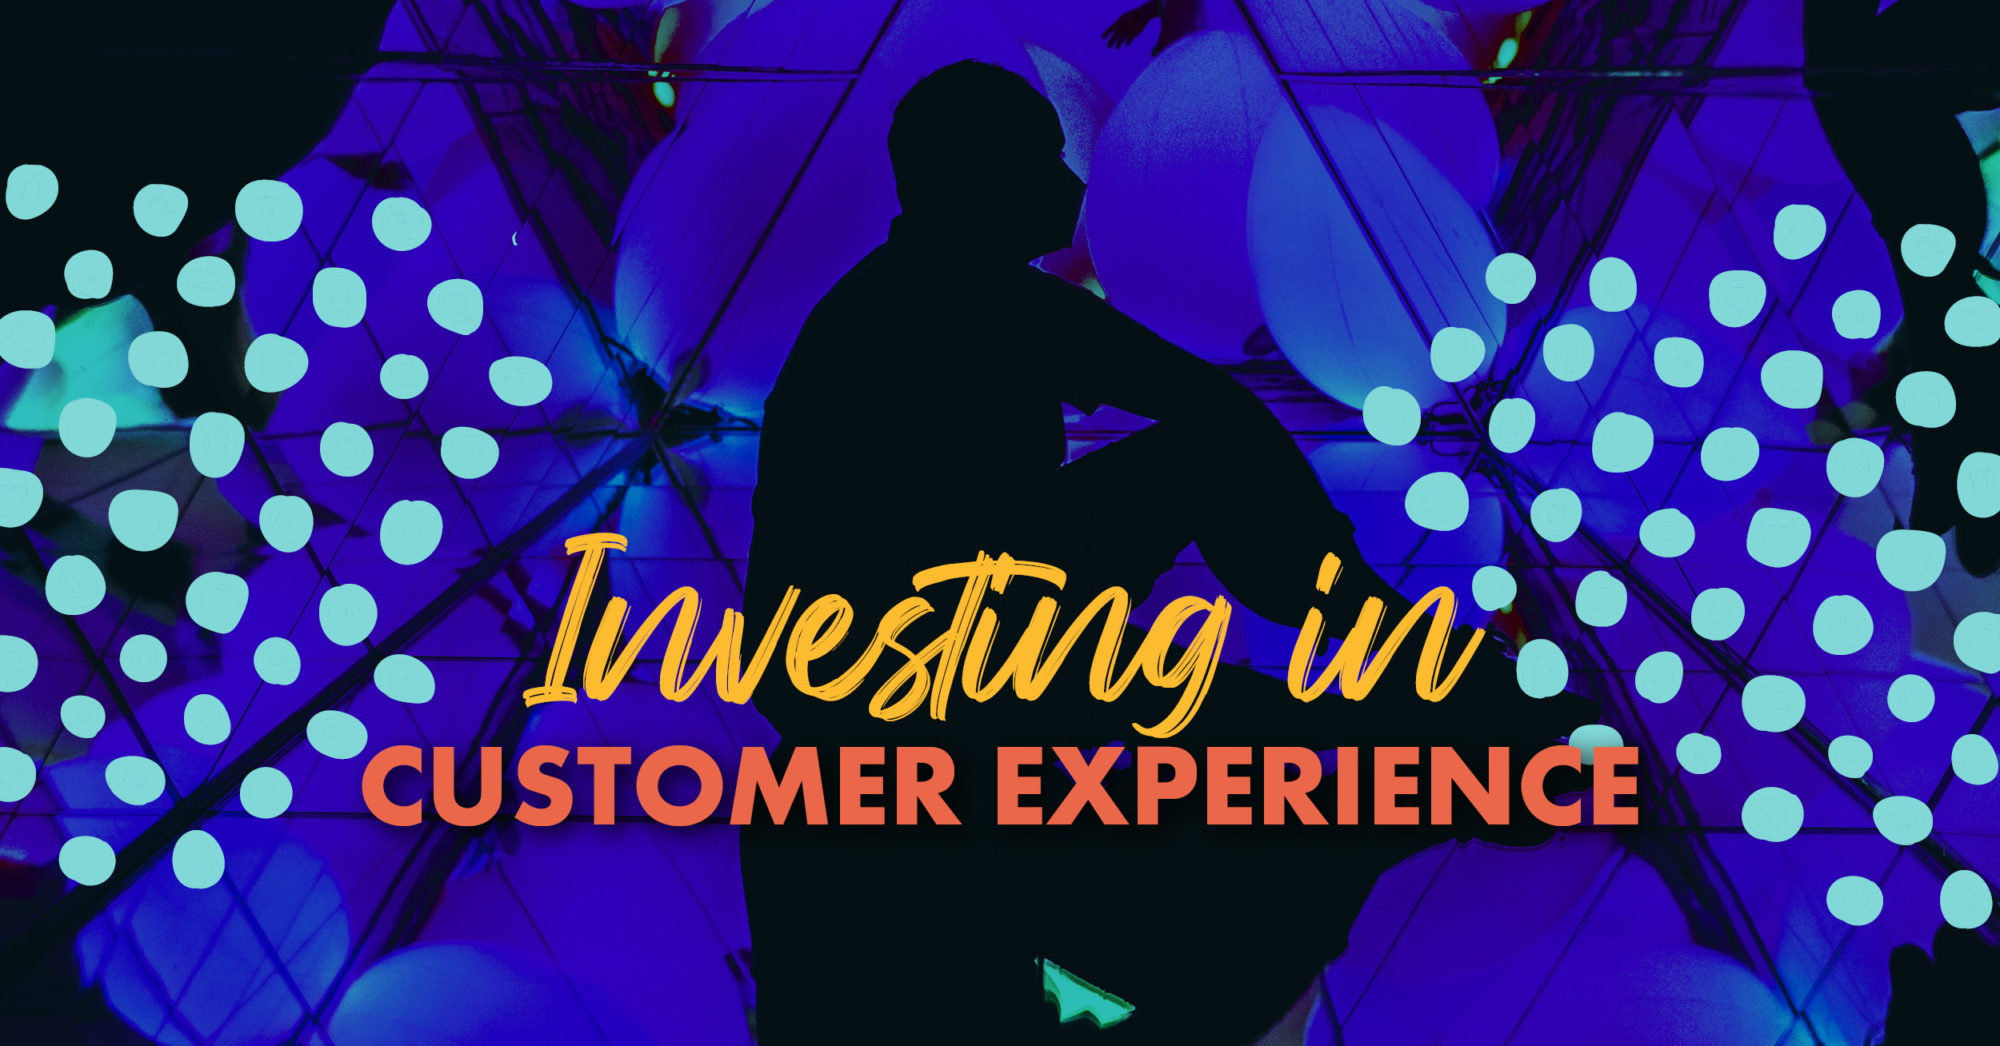 "Investing In Customer Experience" text over photo of man sitting in a kaleidoscope